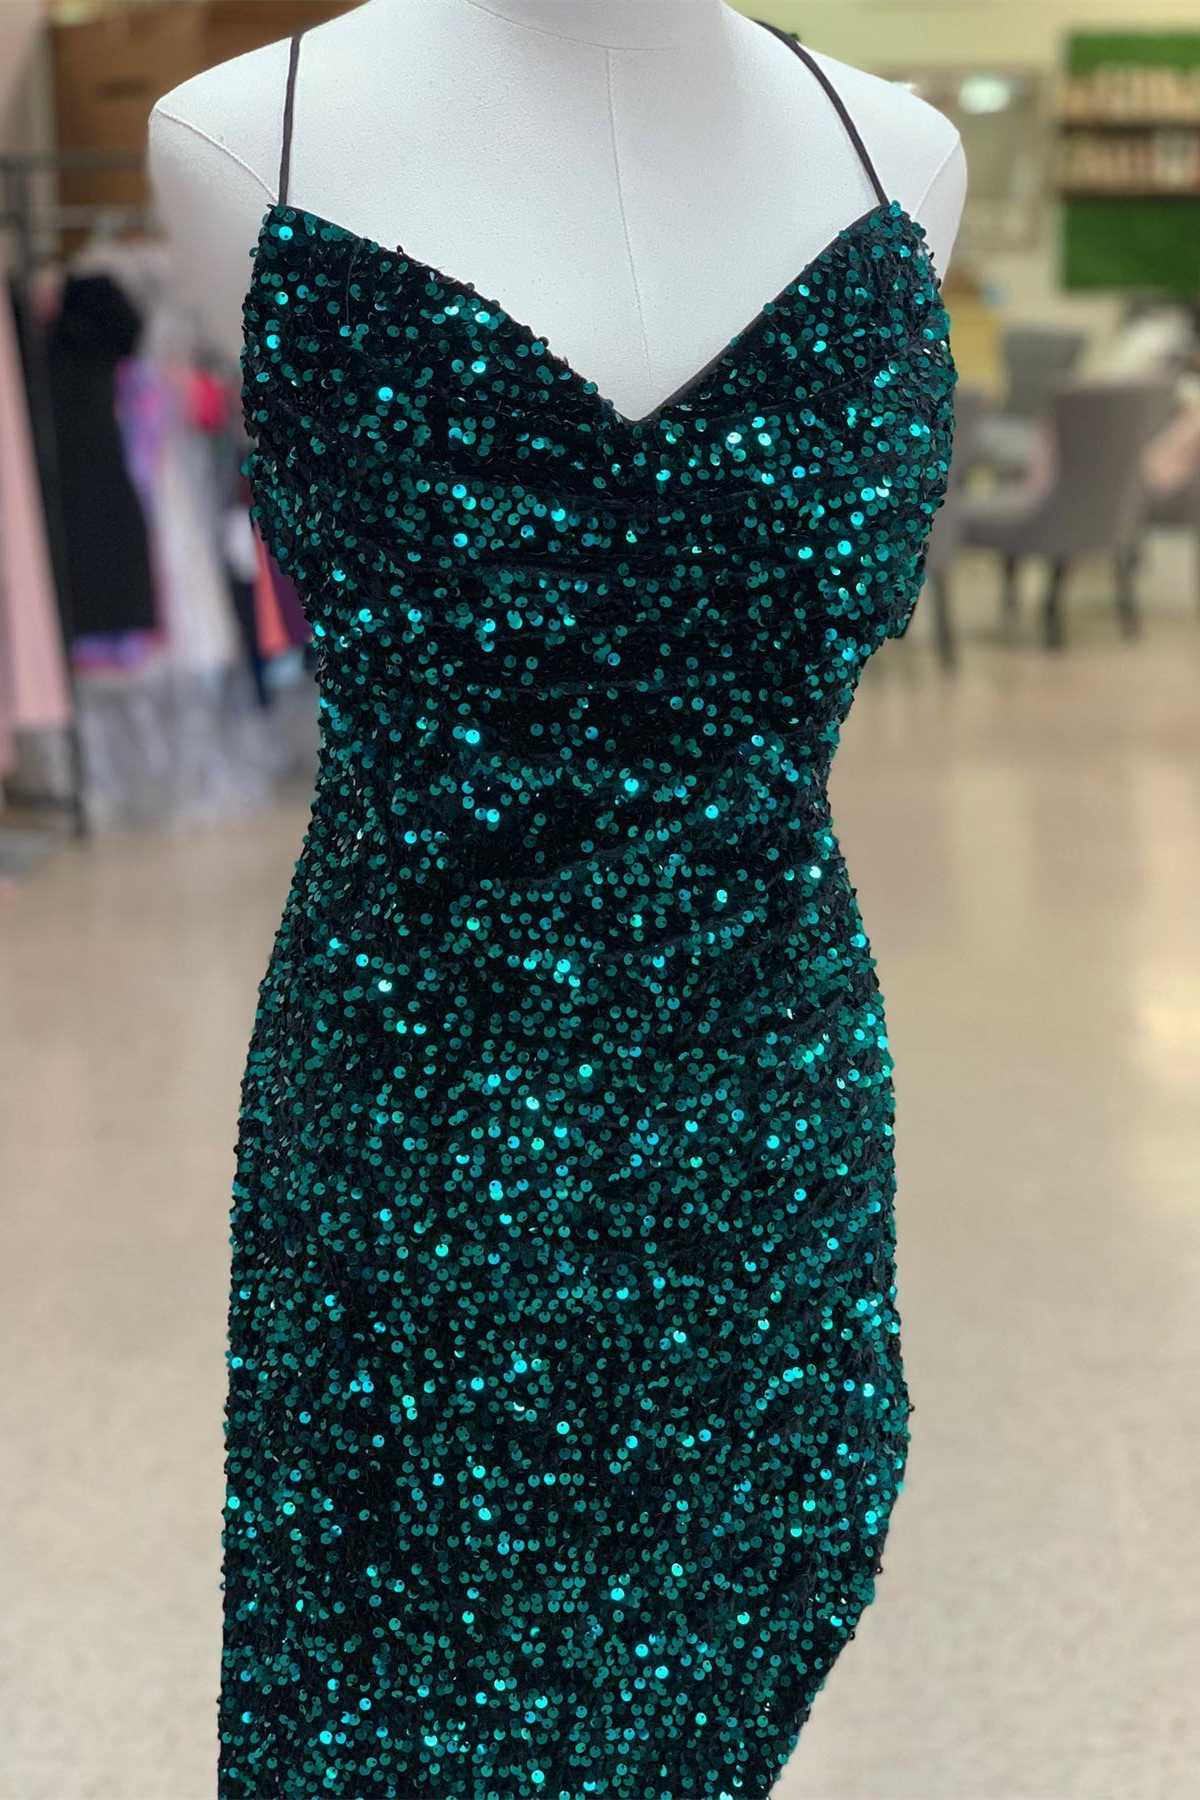 Red Sequin Cowl Neck Mermaid Prom Dress,Green Evening Gown